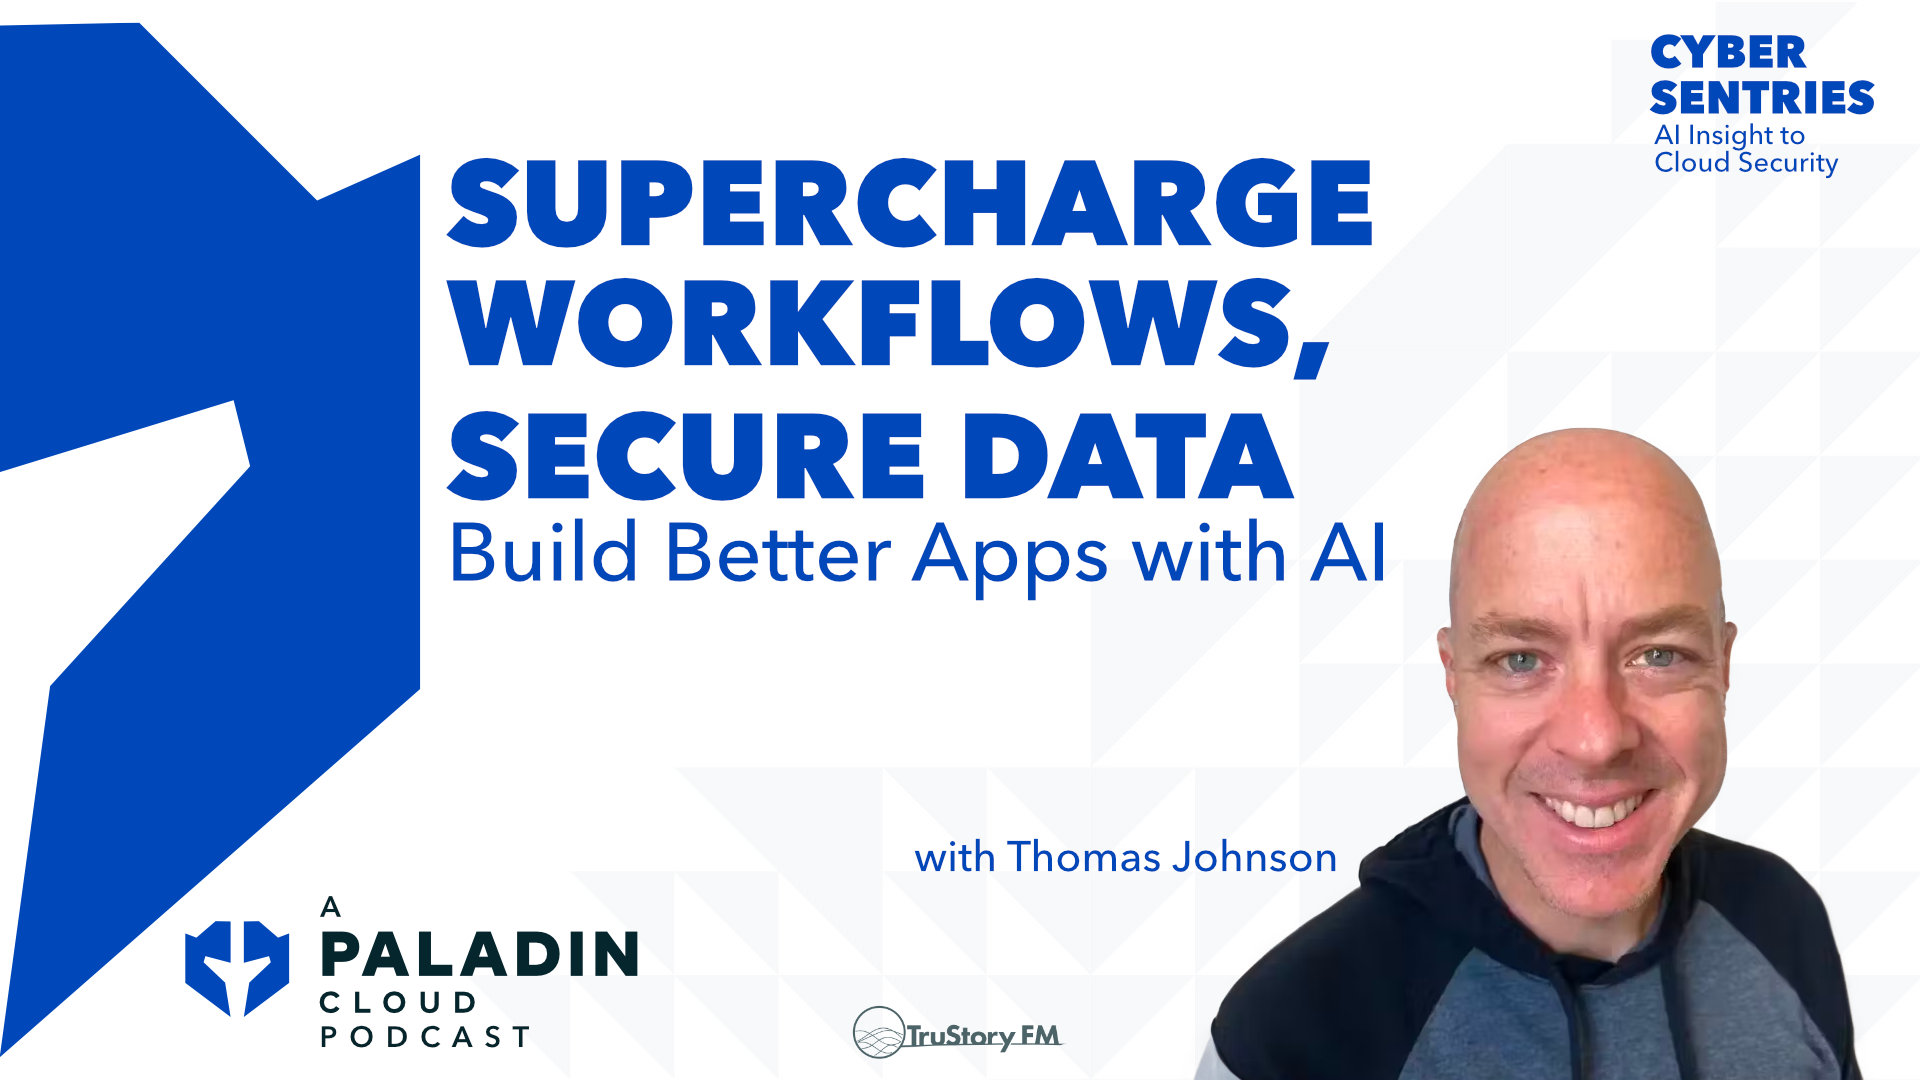 Supercharge Workflows, Secure Data Build Better Apps with AI Includes a photo of the speaker Thomas Johnson